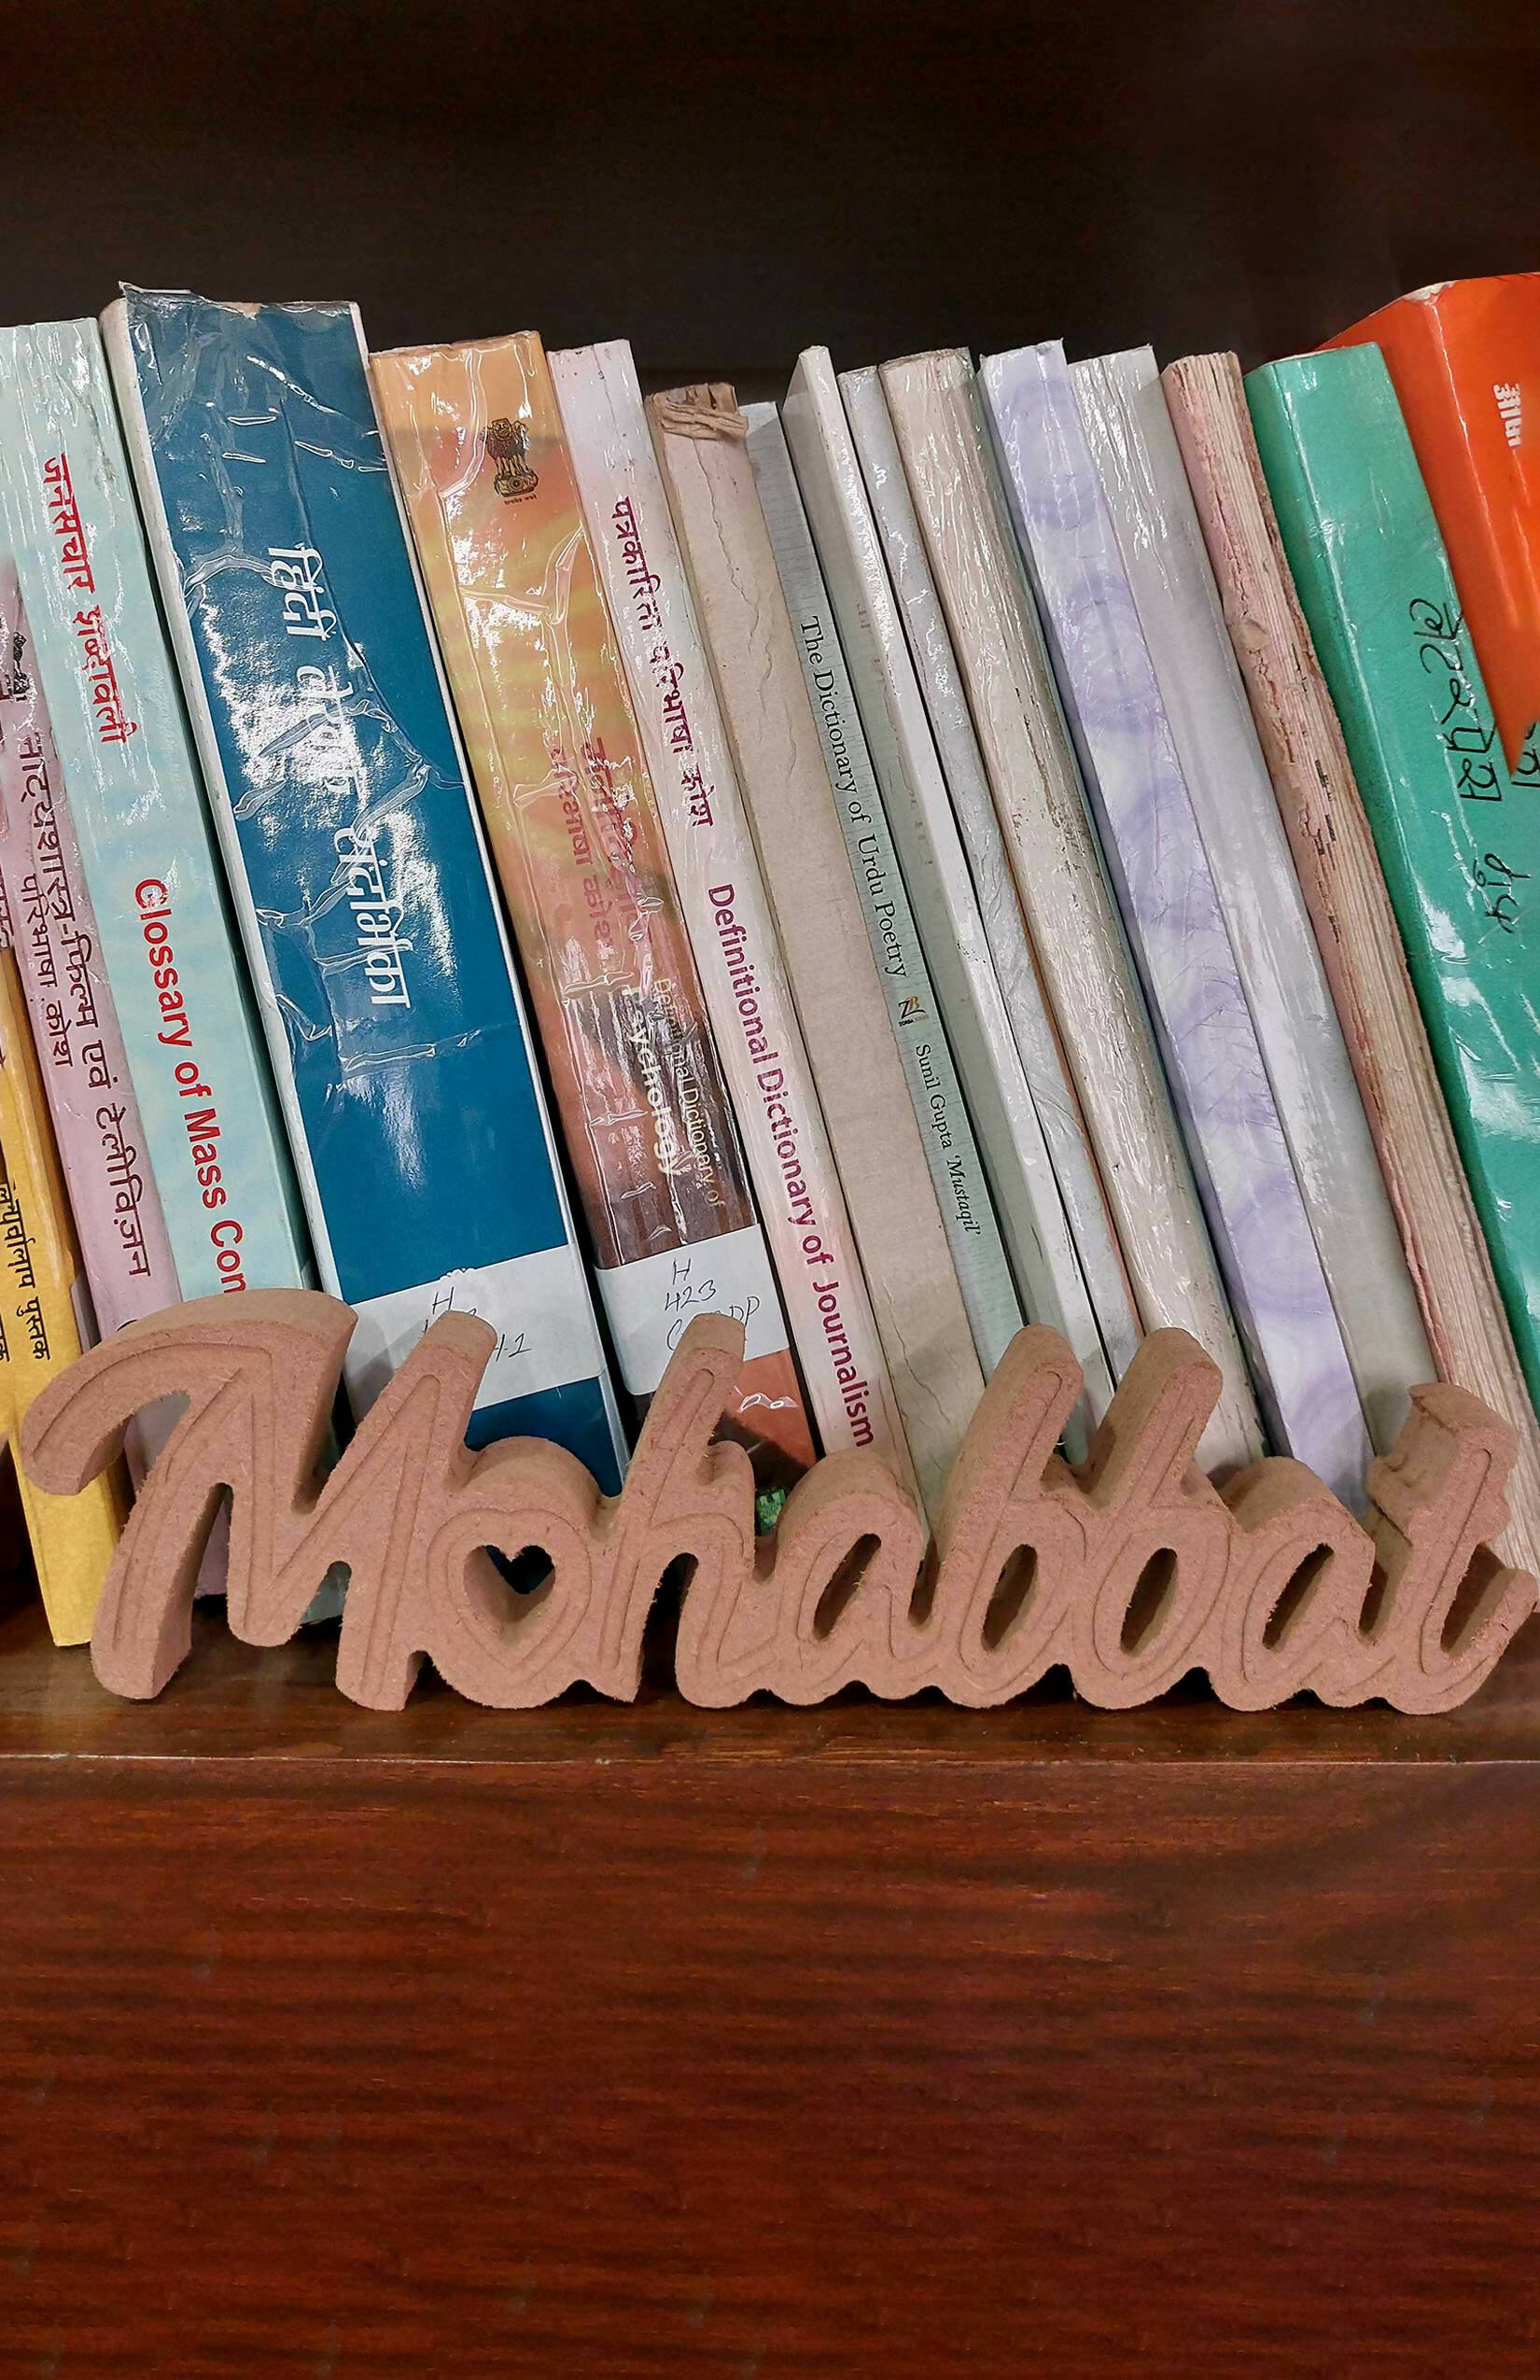 Wooden Mohabbat Text For Home Decor